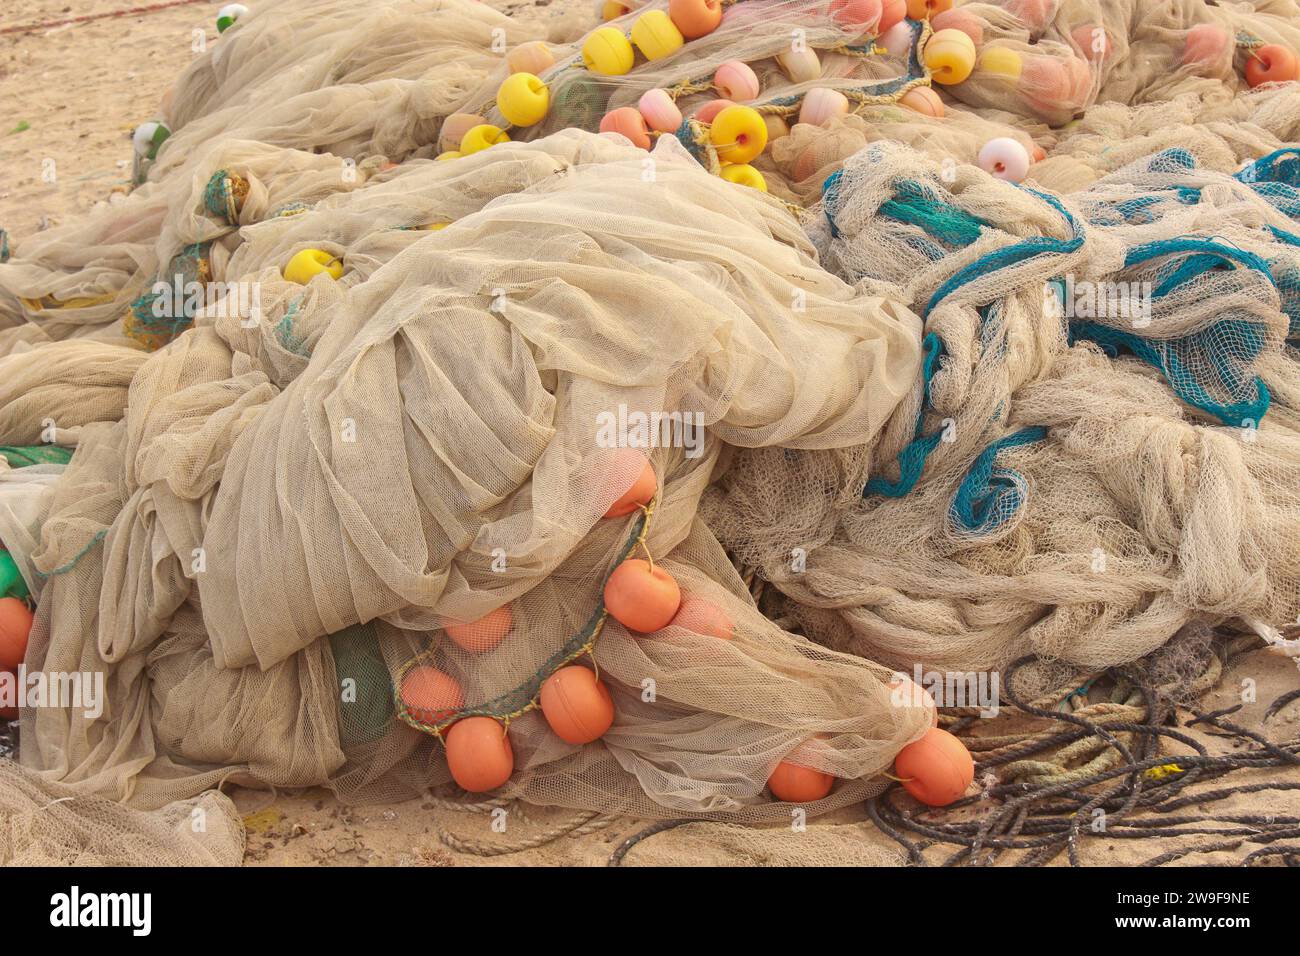 A pile of colorful fishing nets and buoys sits on a sandy beach. The nets are a mix of blues, greens, and oranges, and the buoys are red, yellow, and Stock Photo